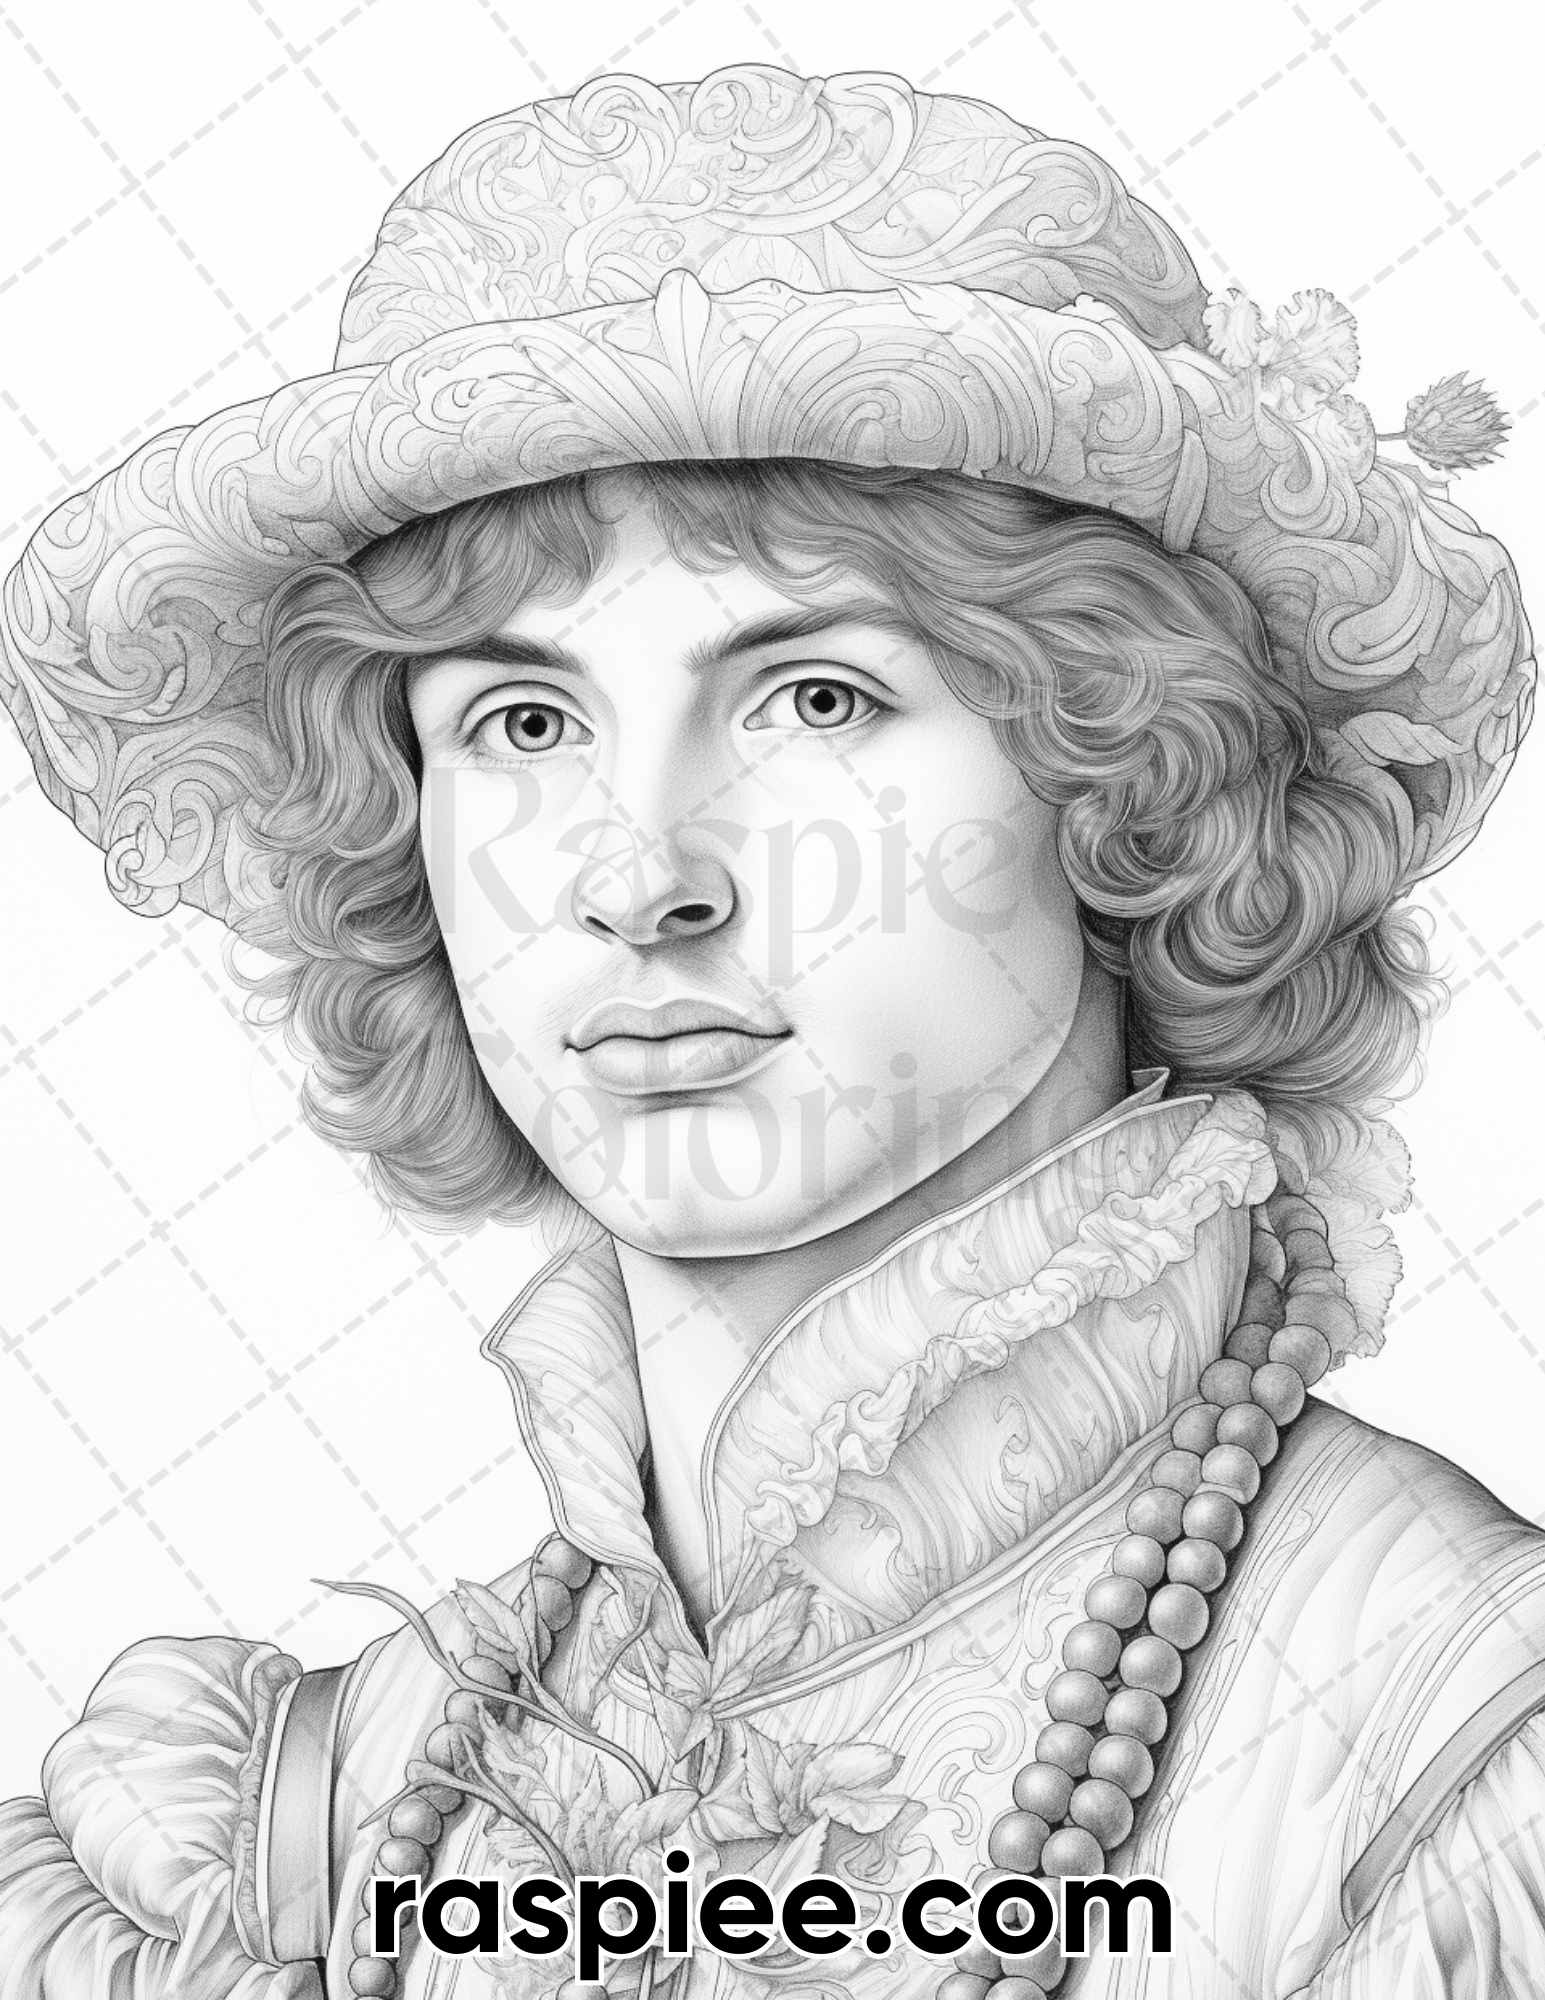 adult coloring pages, adult coloring sheets, adult coloring book pdf, adult coloring book printable, grayscale coloring pages, grayscale coloring books, portrait coloring pages for adults, portrait coloring book, vintage coloring pages, renaissance coloring pages